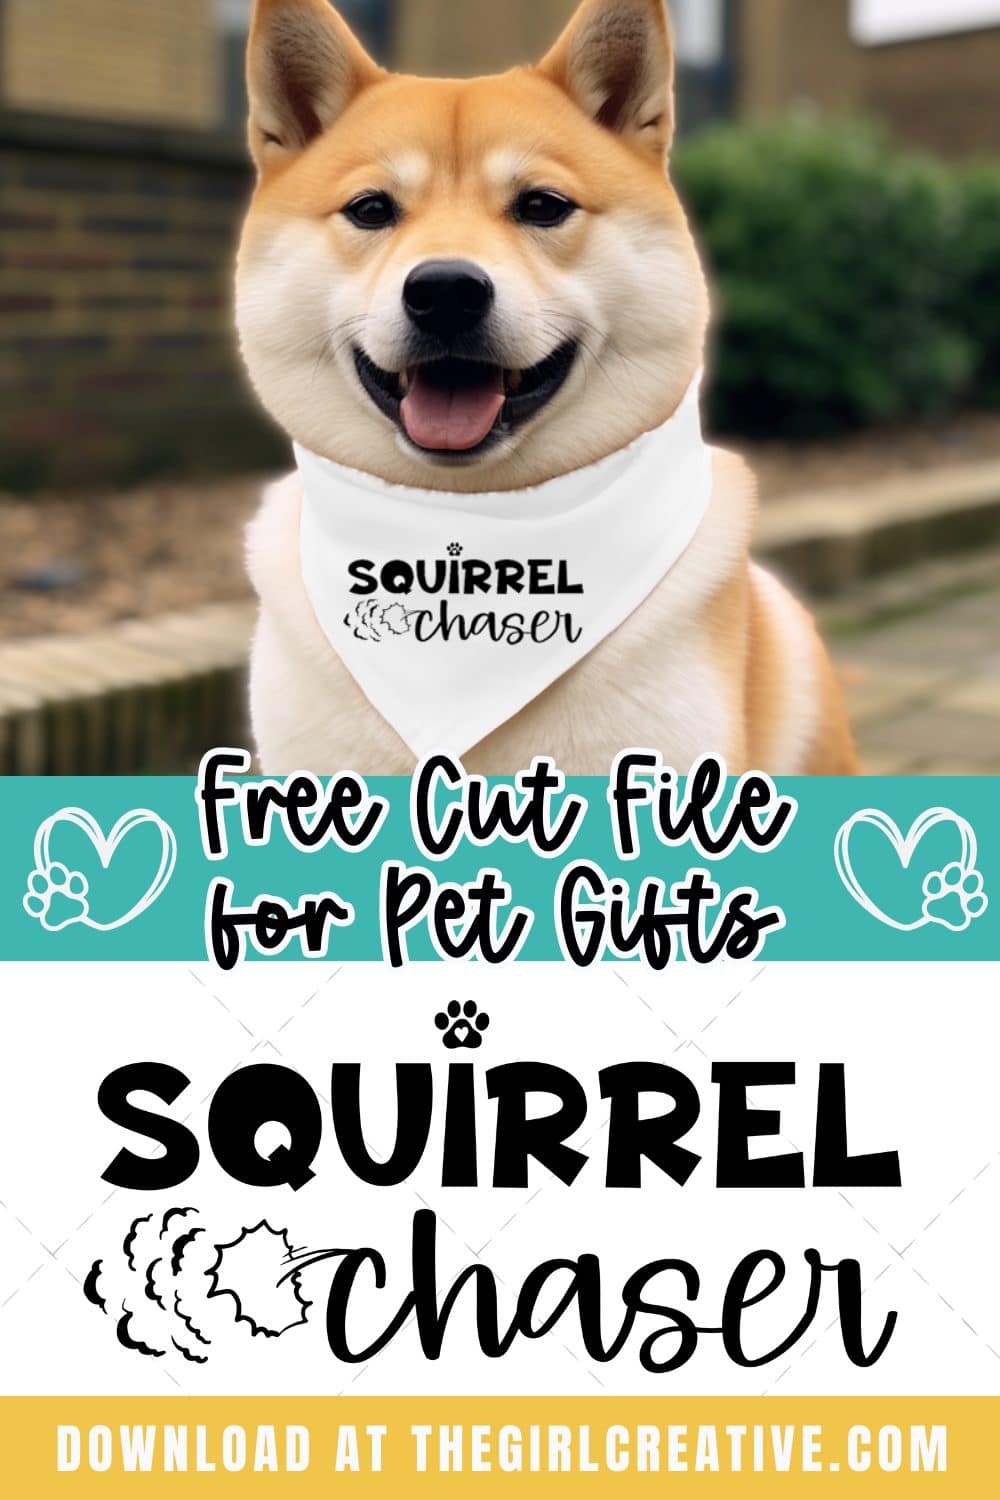 Adorable dog wearing a bandana that says squirrel chaser on it.